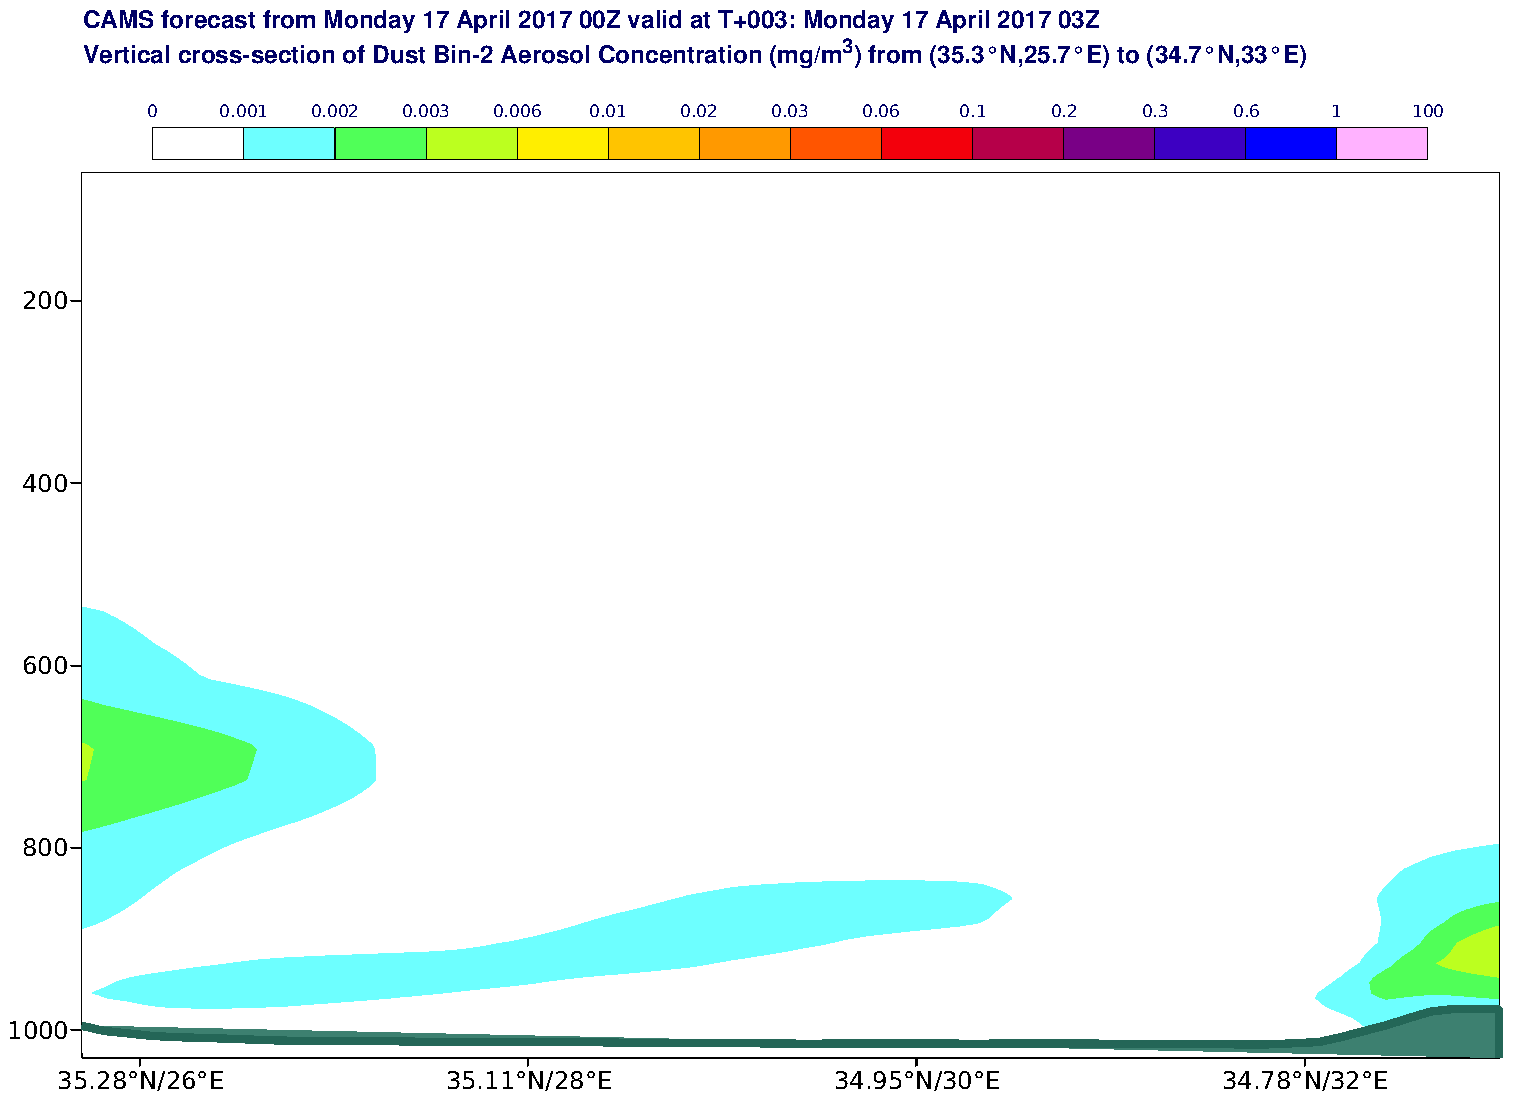 Vertical cross-section of Dust Bin-2 Aerosol Concentration (mg/m3) valid at T3 - 2017-04-17 03:00